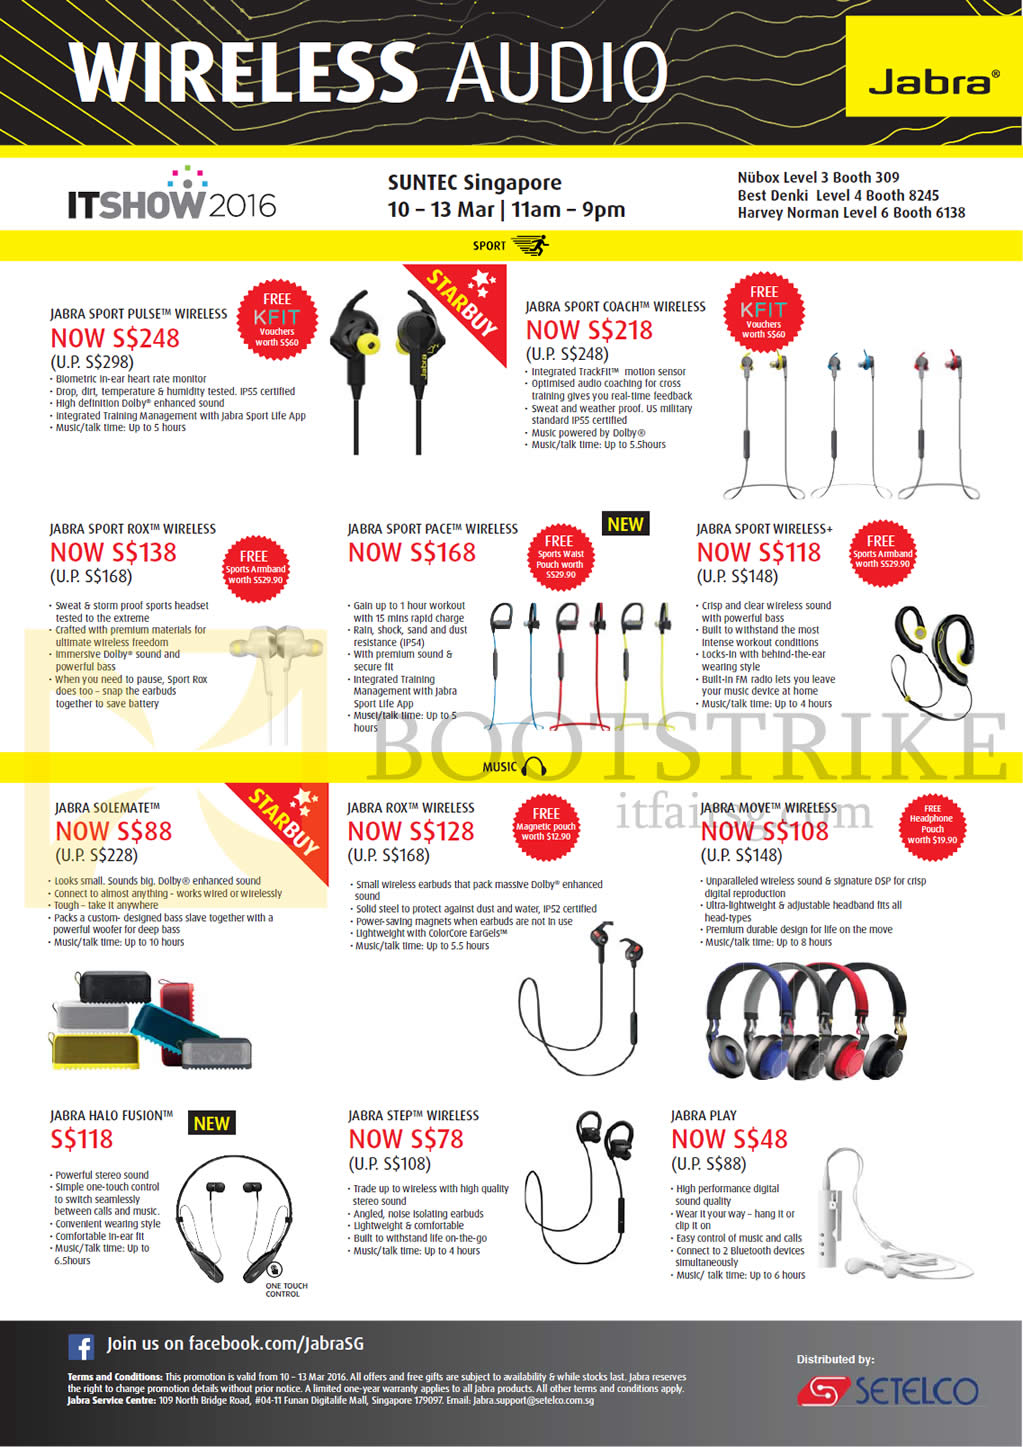 IT SHOW 2016 price list image brochure of Jabra Bluetooth Headphones, Earphones, Speakers, Sport Pulse Wireless, Rox, Coach, Pace, Sport, Solemate, Rox, Move, Step Wireless, Halo Fusion, Play